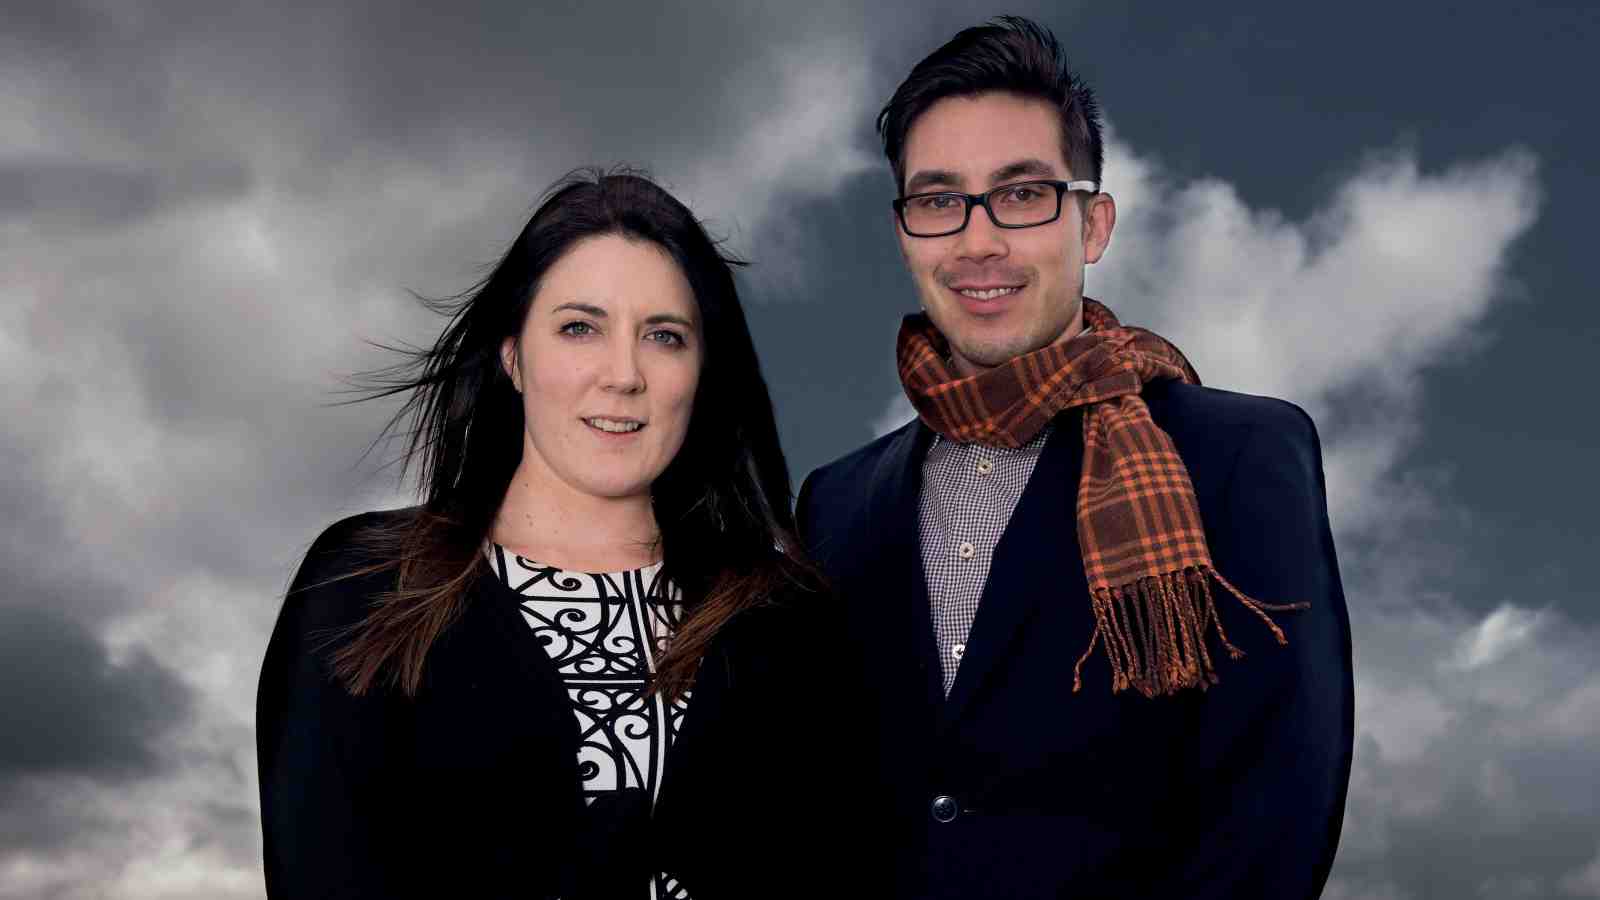 Victoria University alumni Lisa McLaren and James Young-Drew will be representing the voice of New Zealand youth at the 2016 United Nations Climate Change Conference in Paris.